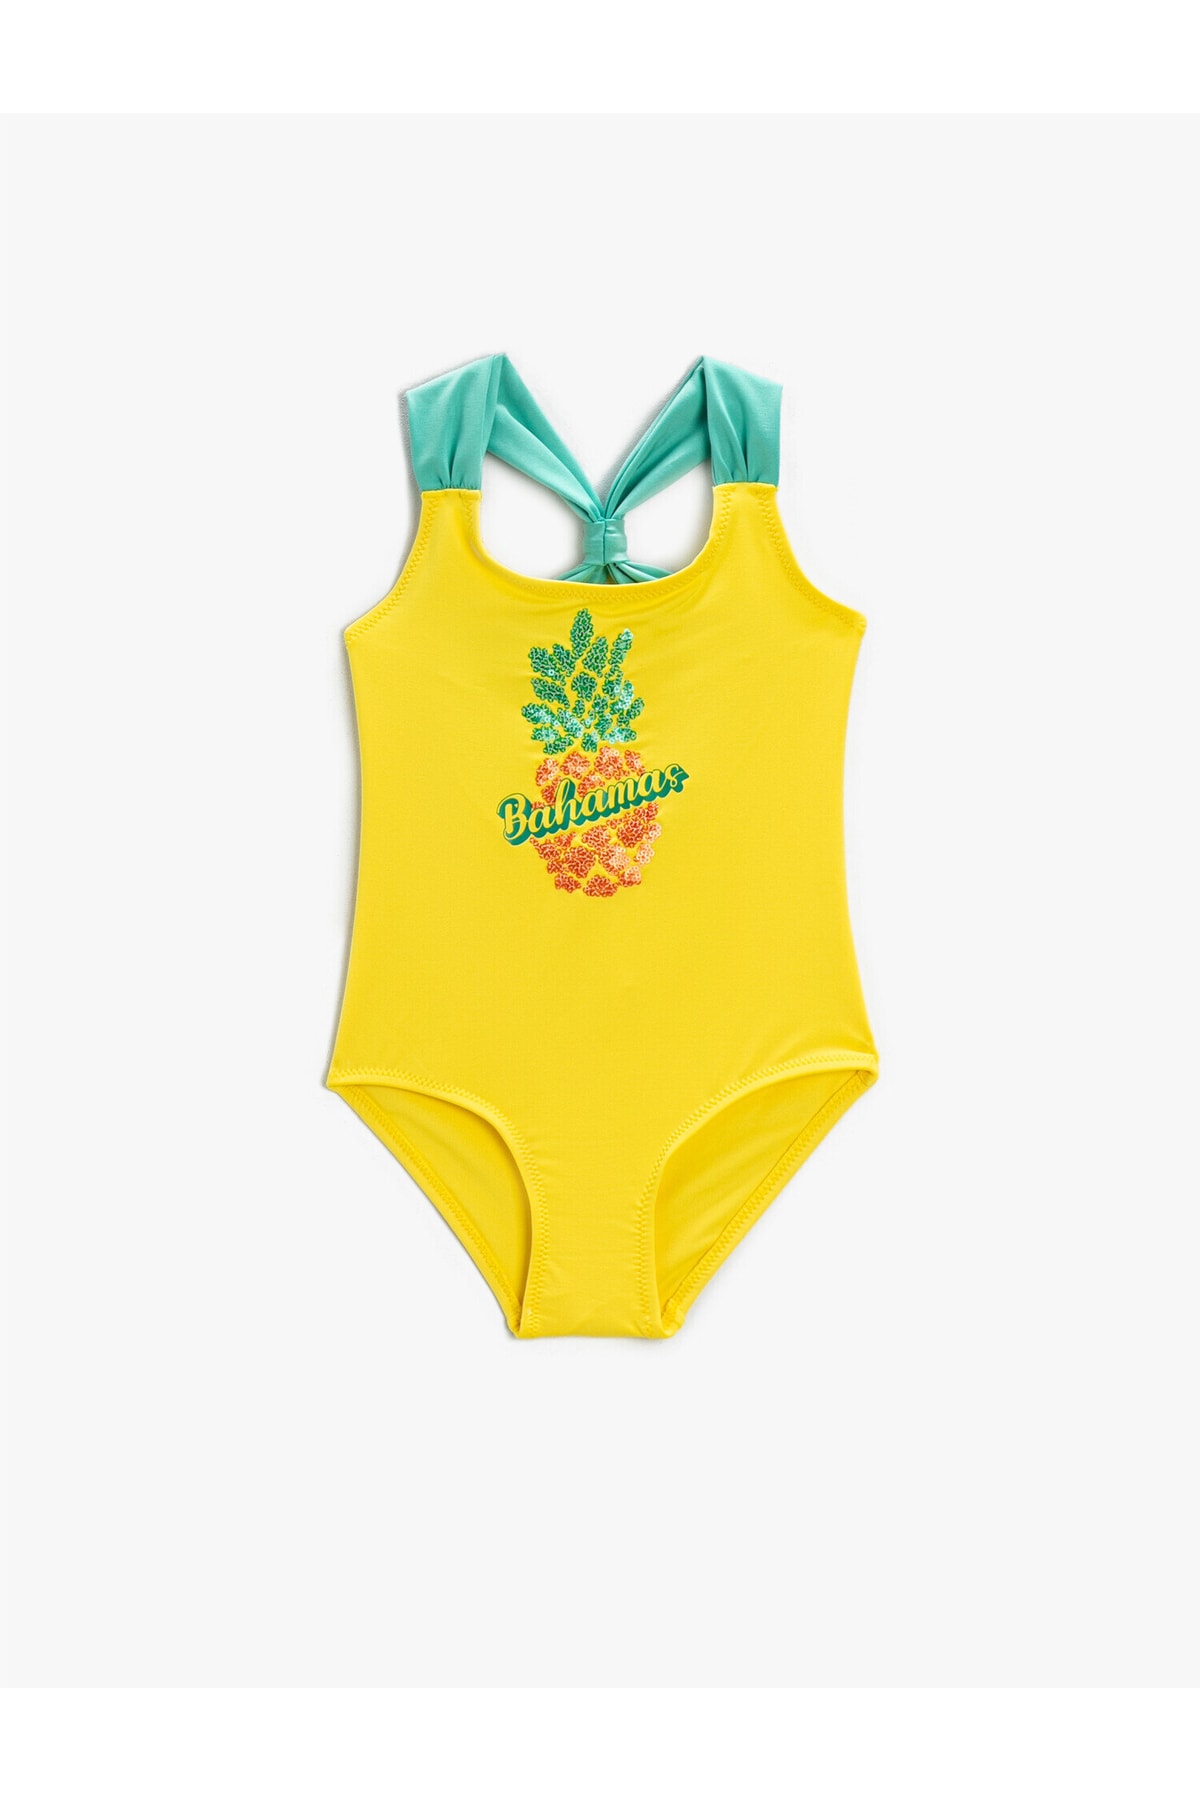 Koton Swimsuit Sequin Detailed Pineapple Printed